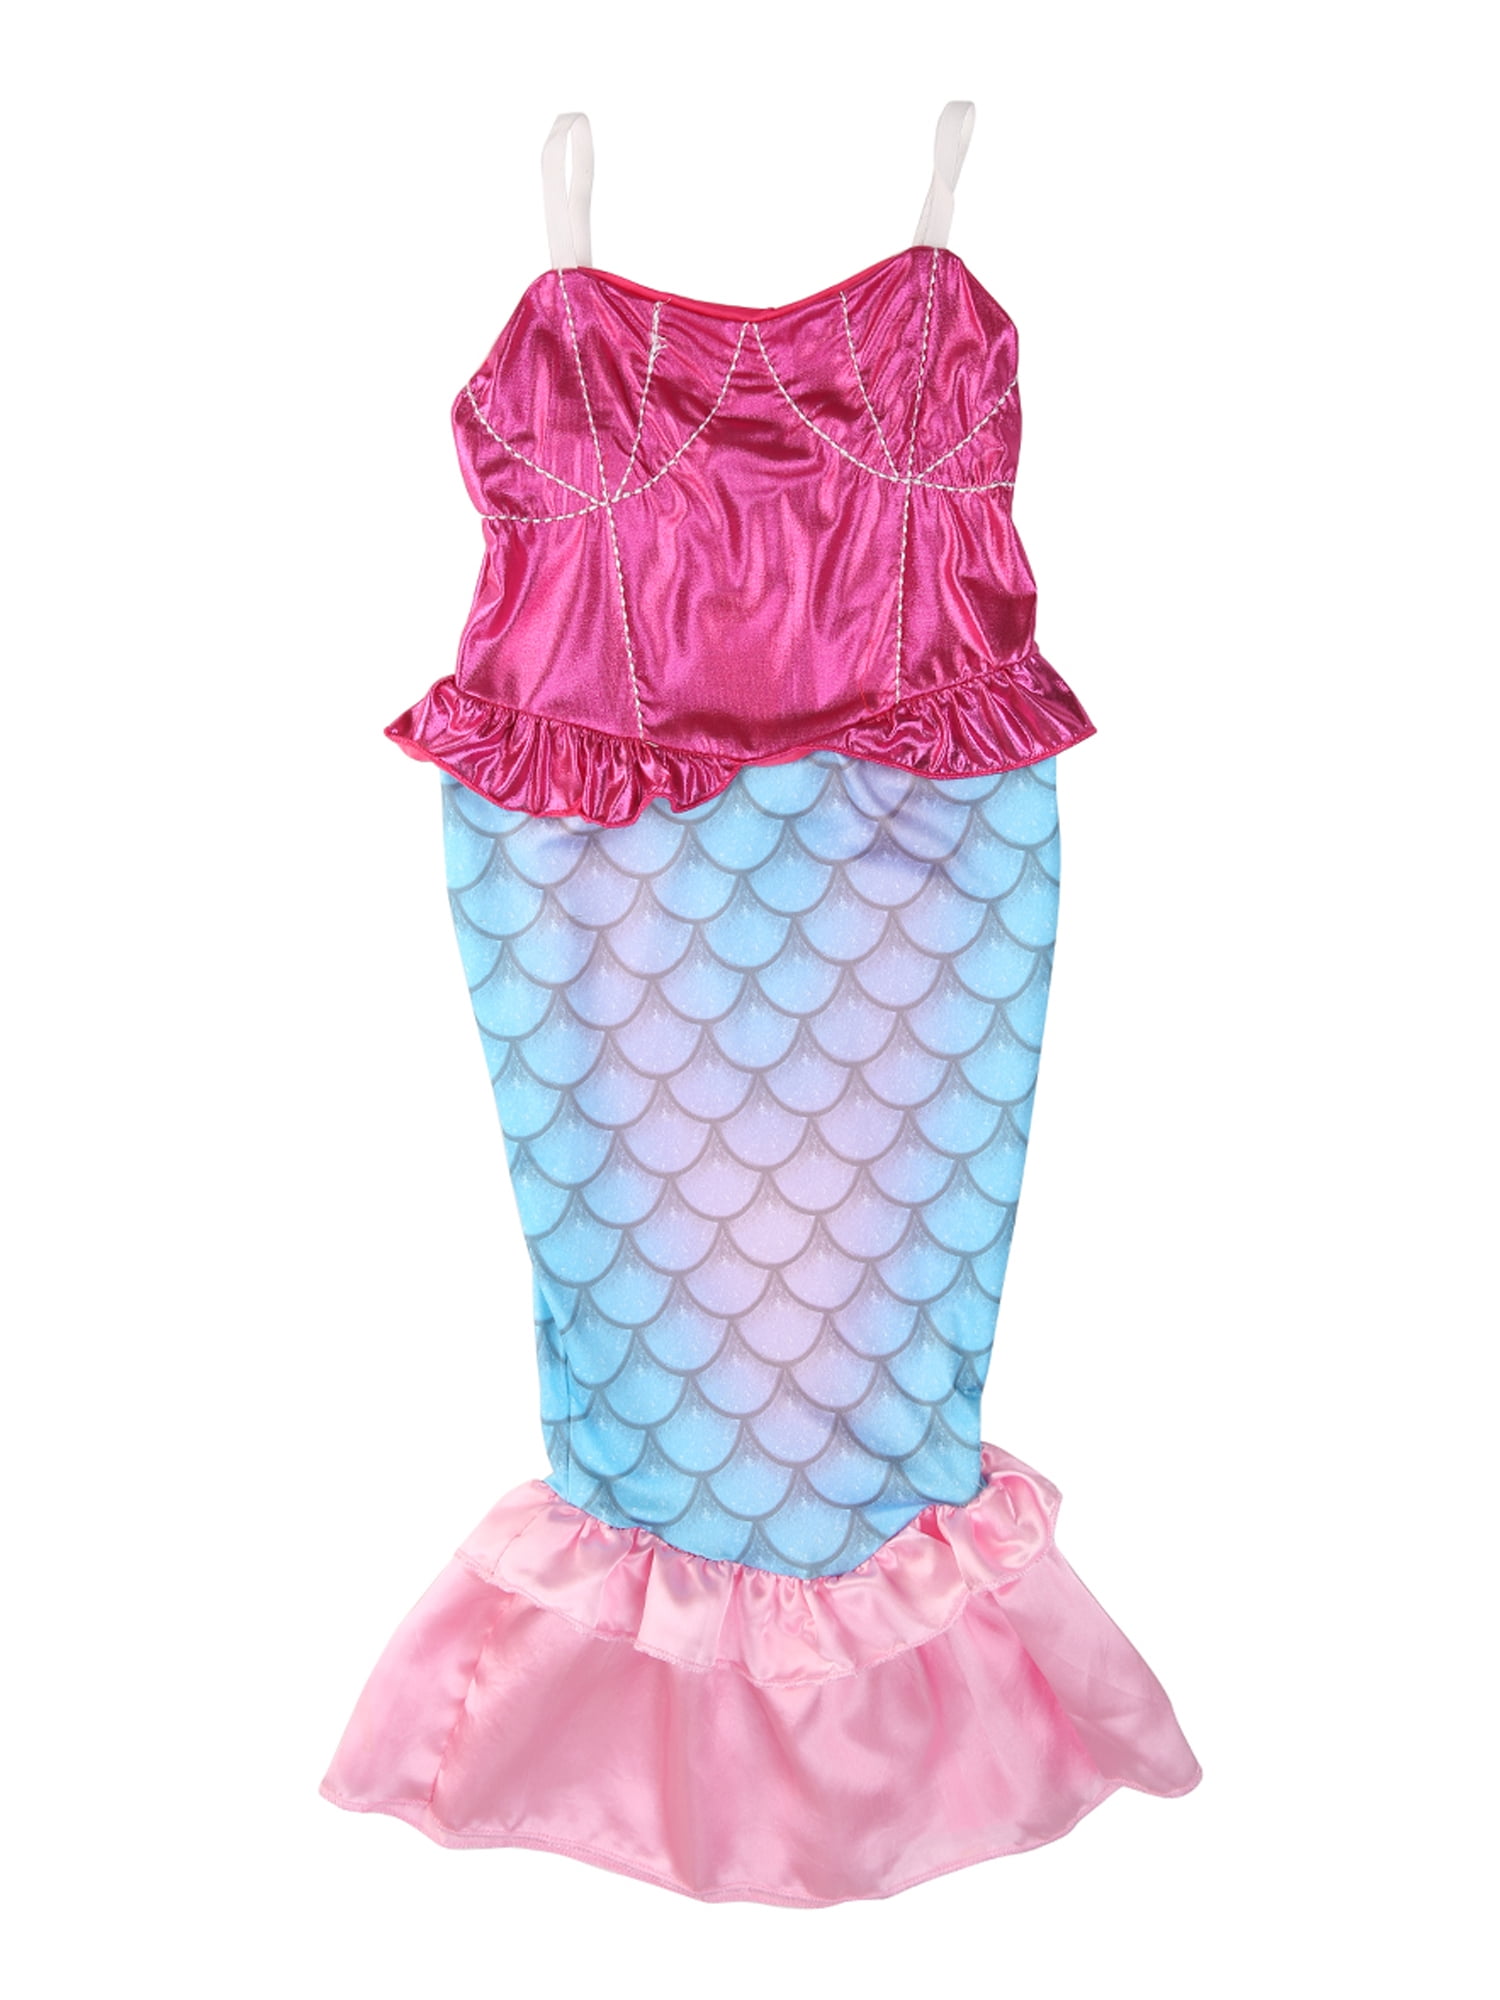 Infant Toddler Baby Halloween Clothes Mermaid Kids Girls Dresses Costume